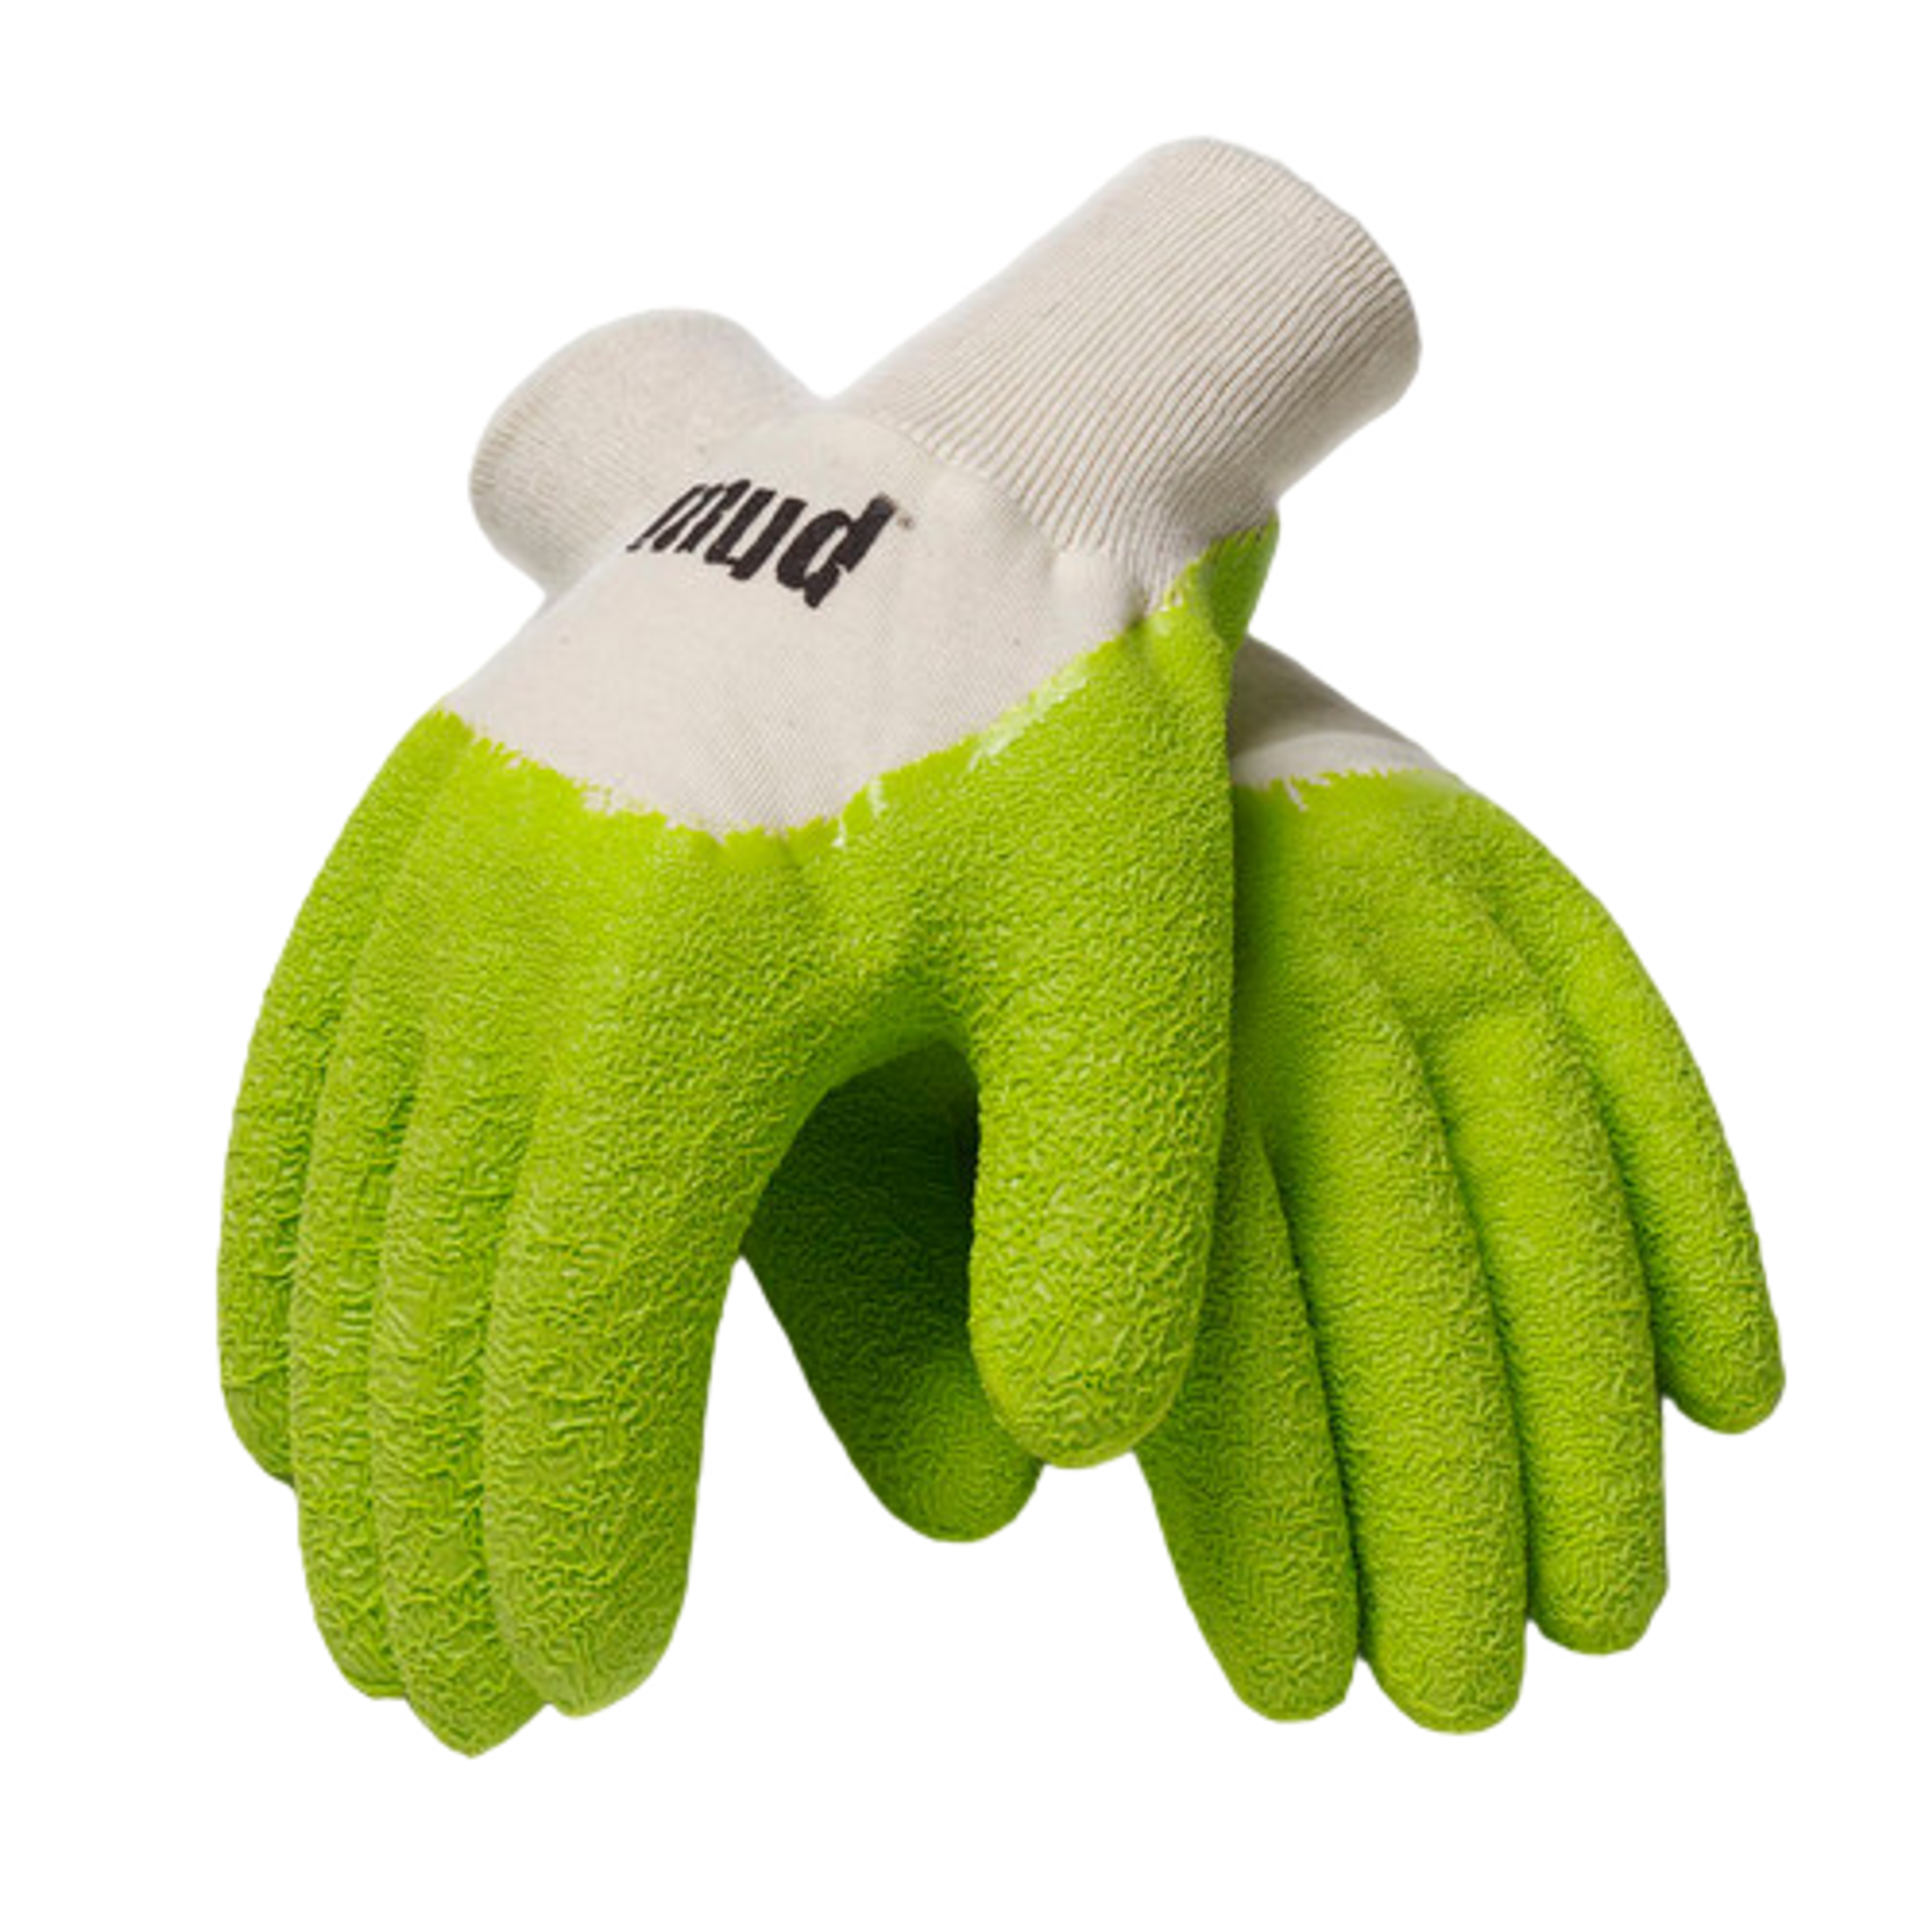 Mud The Original Over The Knuckle Latex Grip Gloves